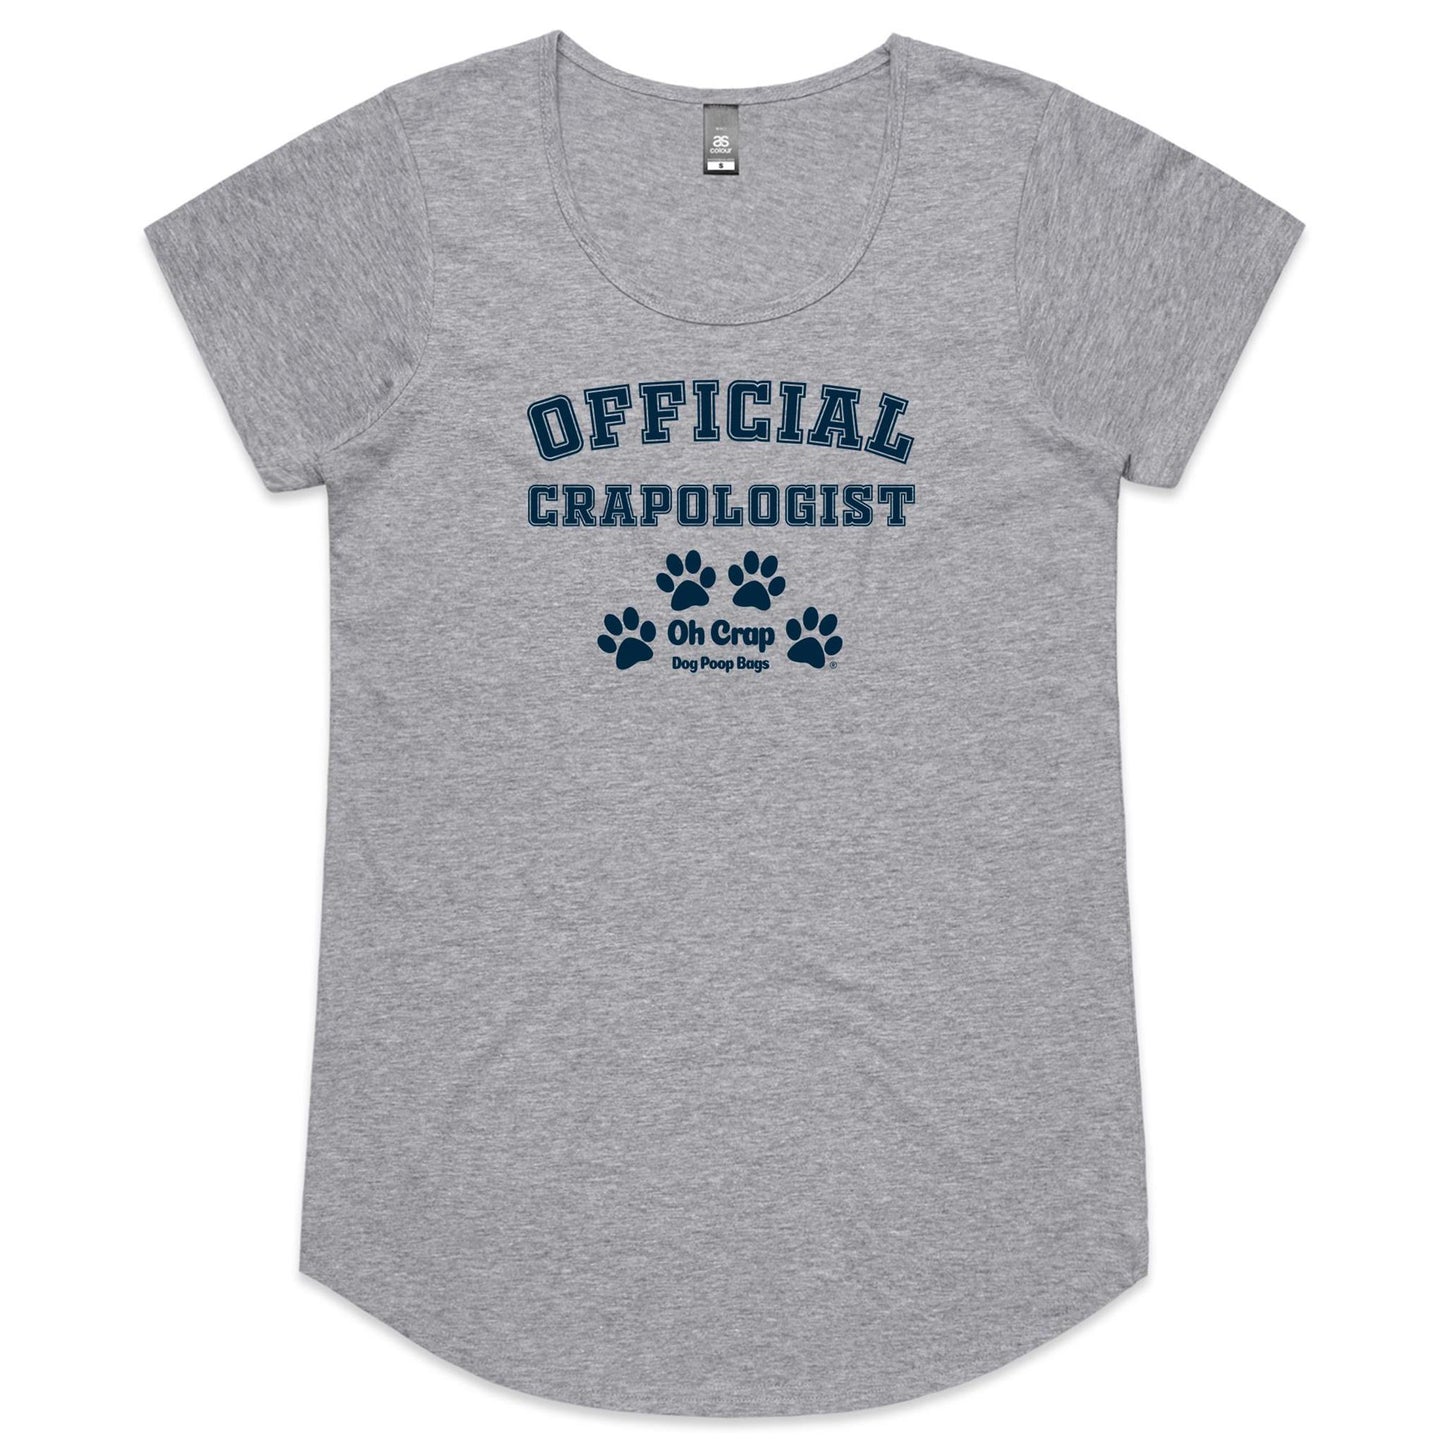 Official Crapologist Women's Scoop T-Shirt: Wear The Change!